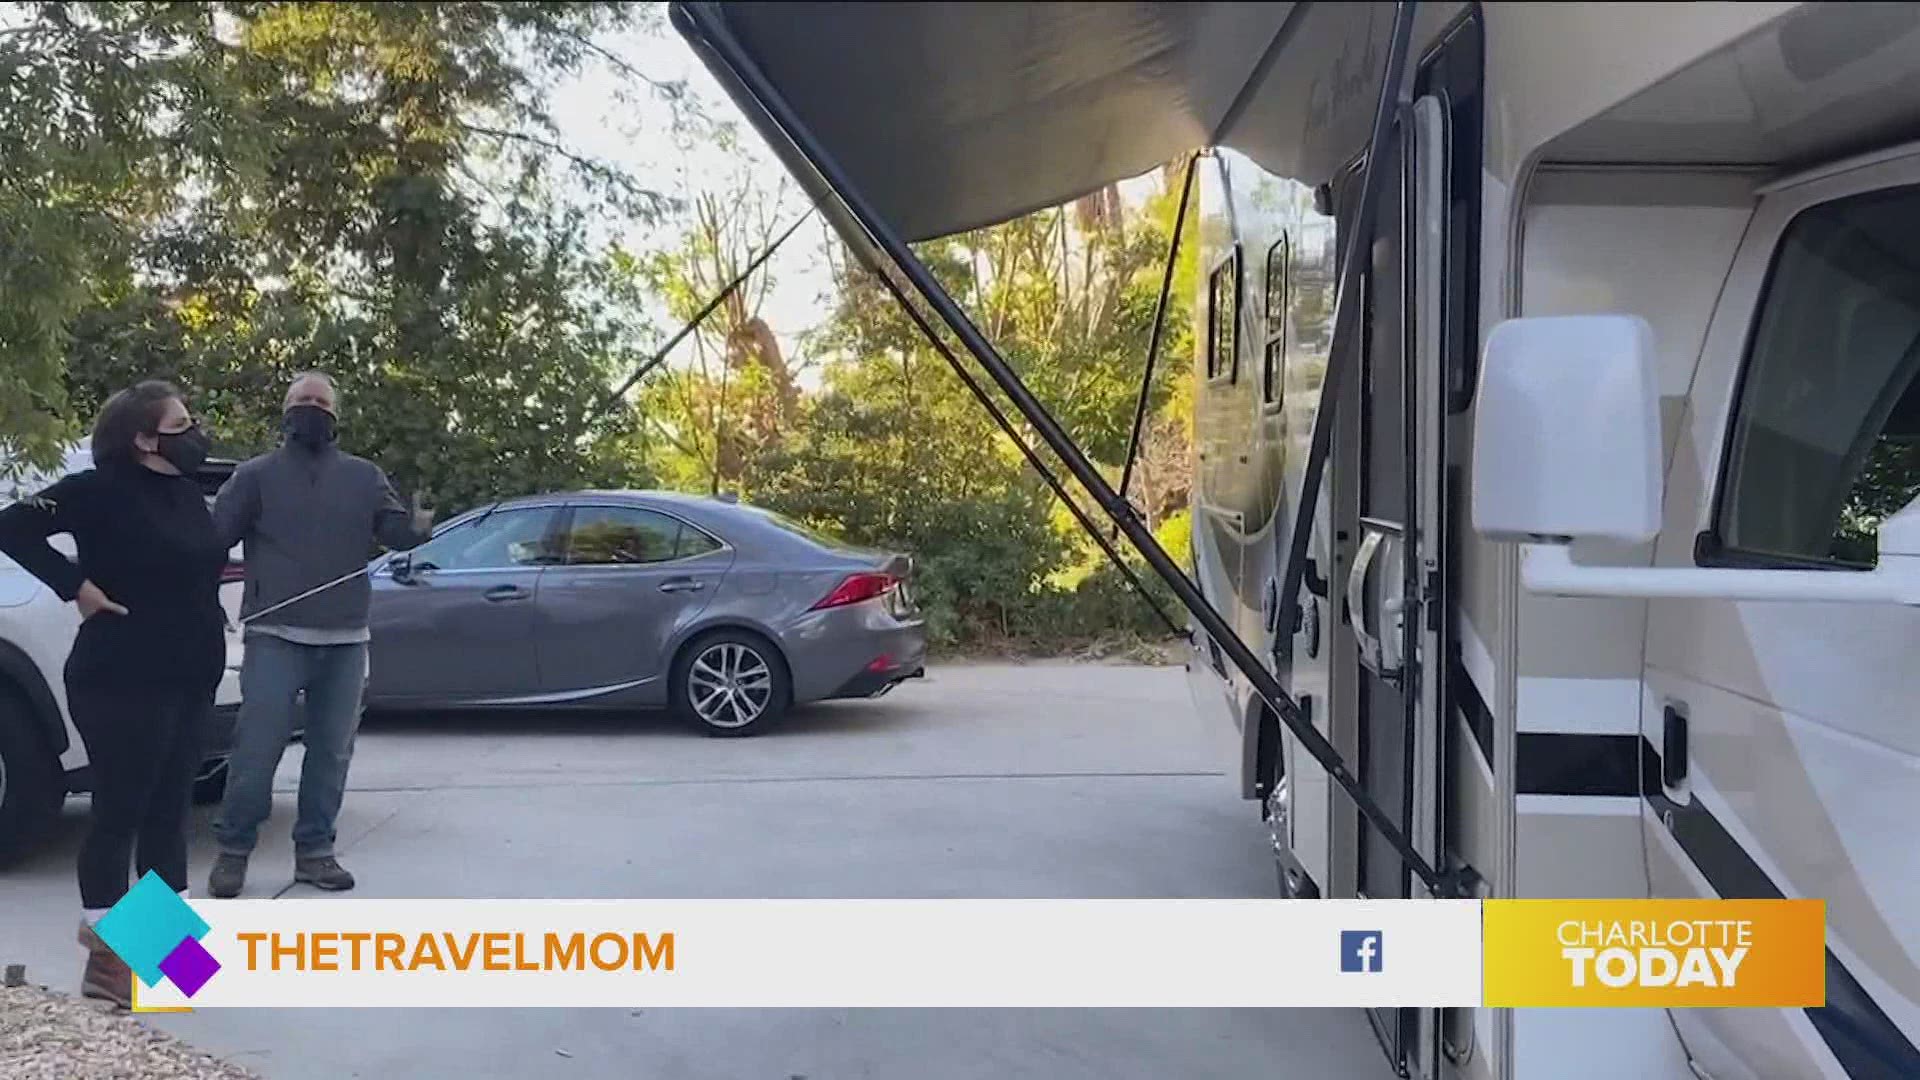 The Travel Mom has some tips for traveling in an RV